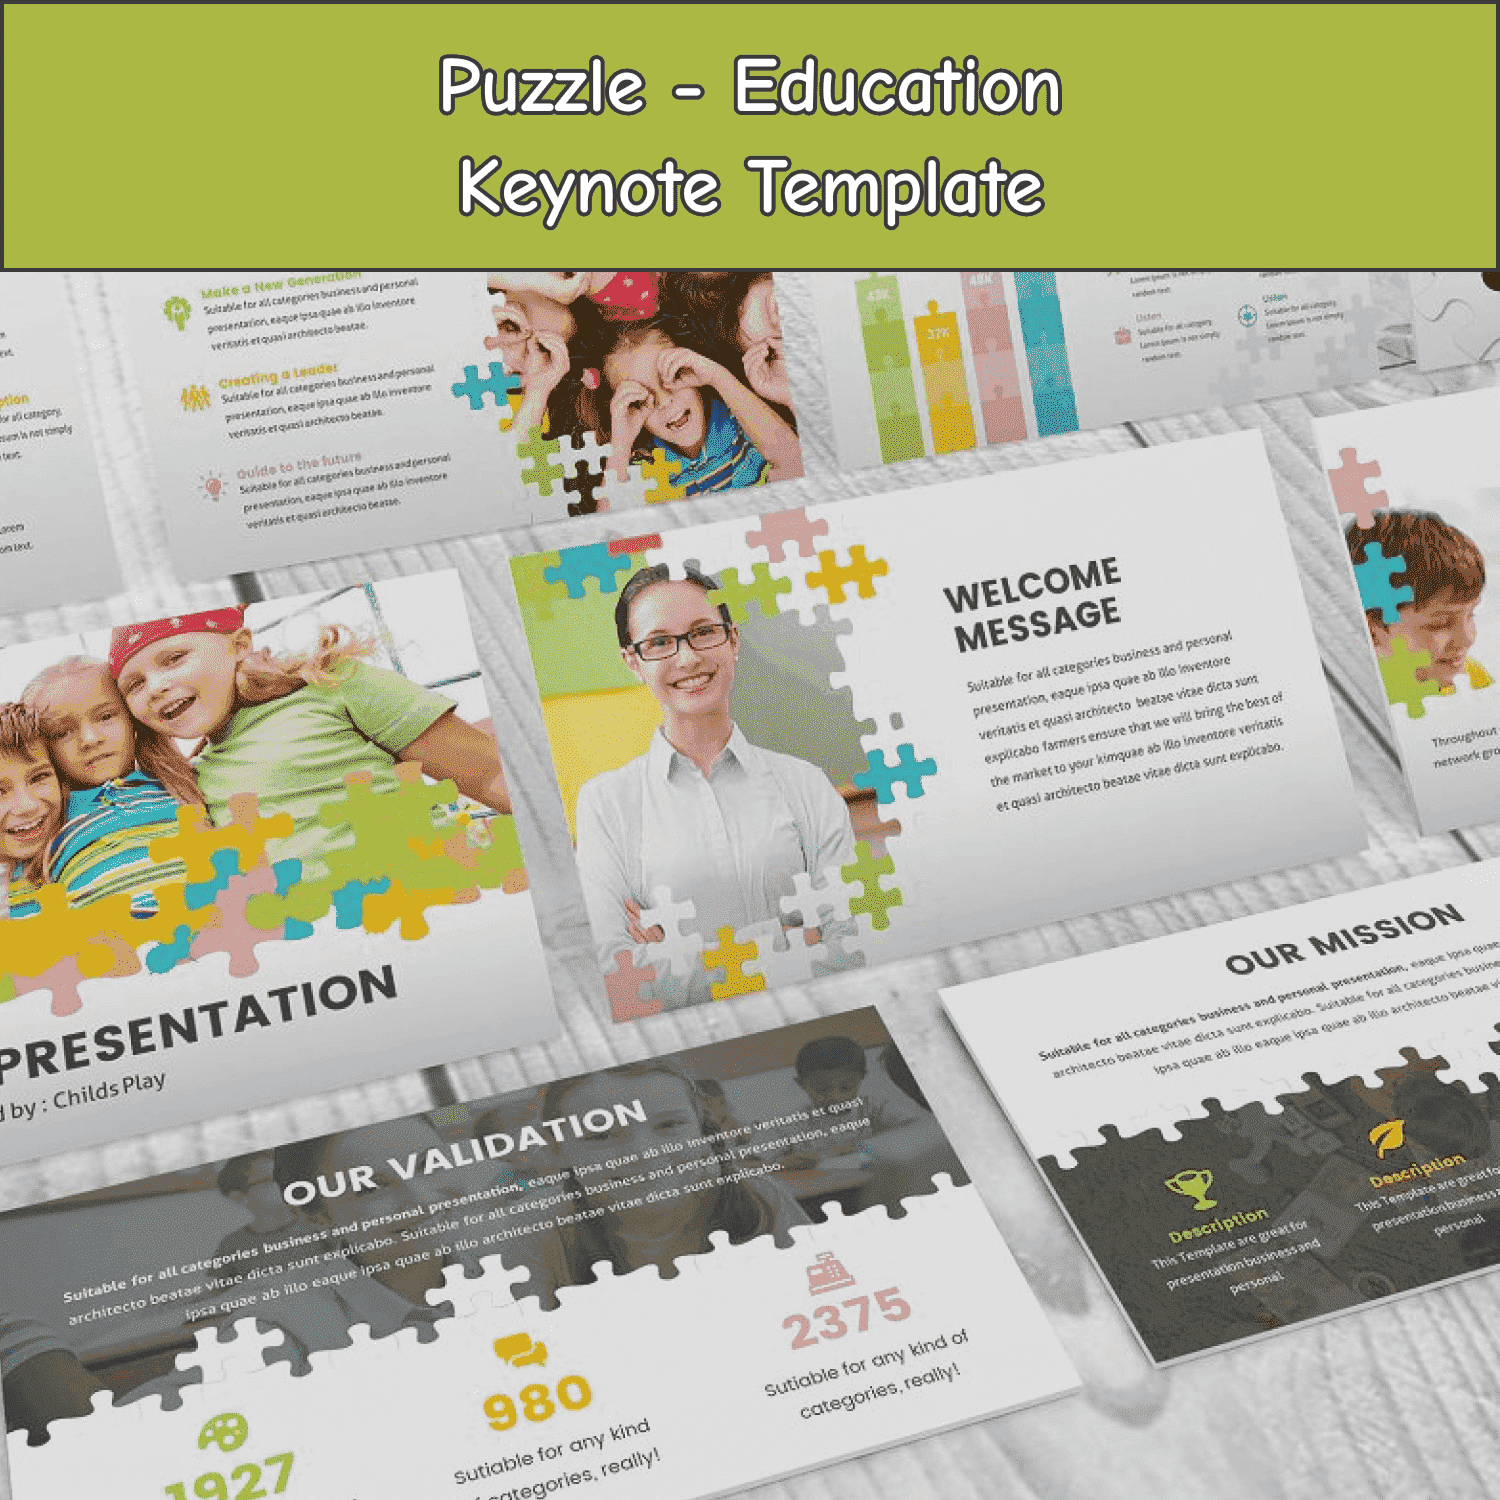 puzzle education keynote template cover image.